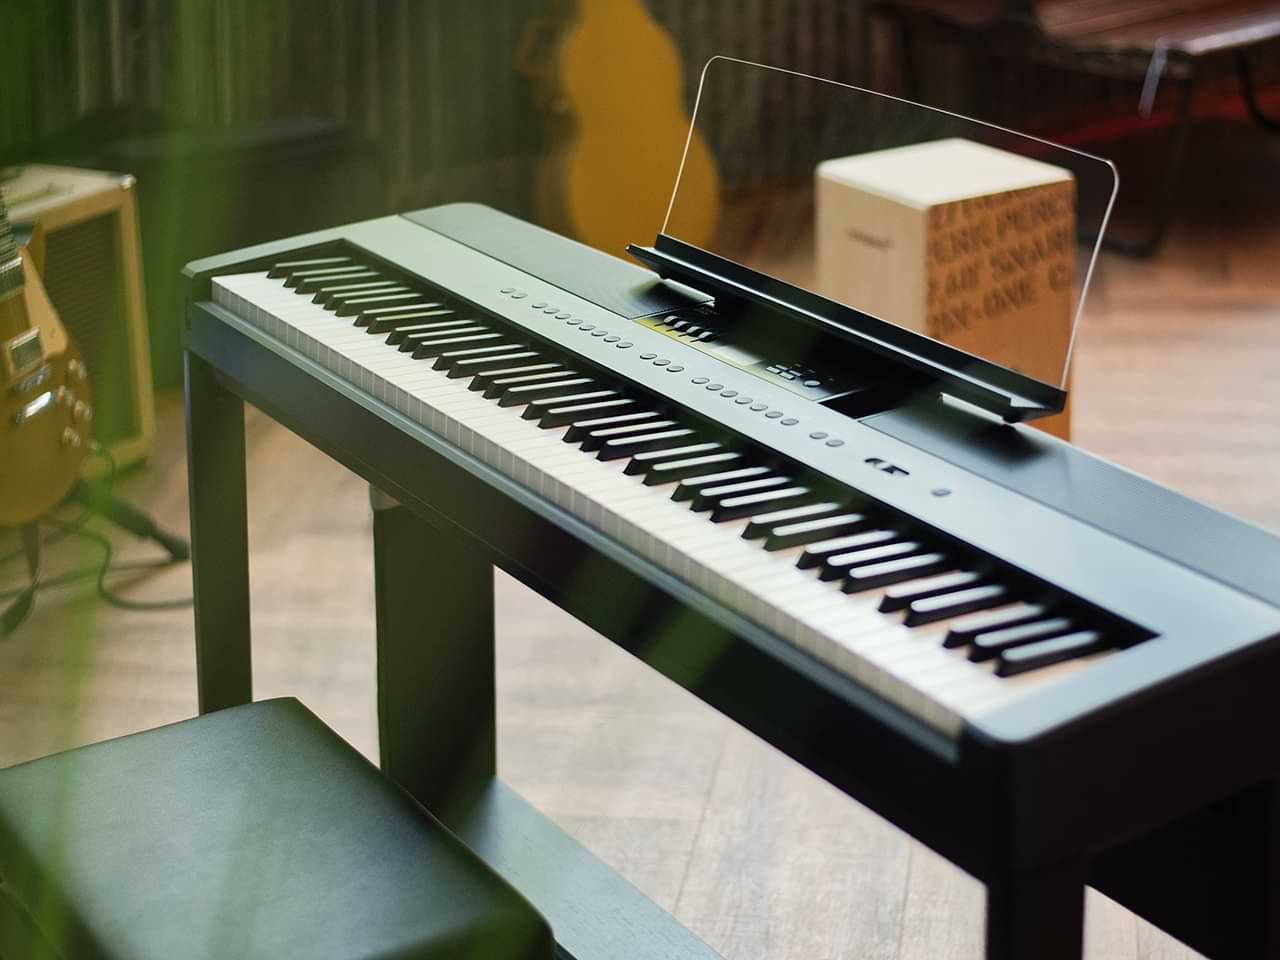 Compare prices for kawai across all European  stores